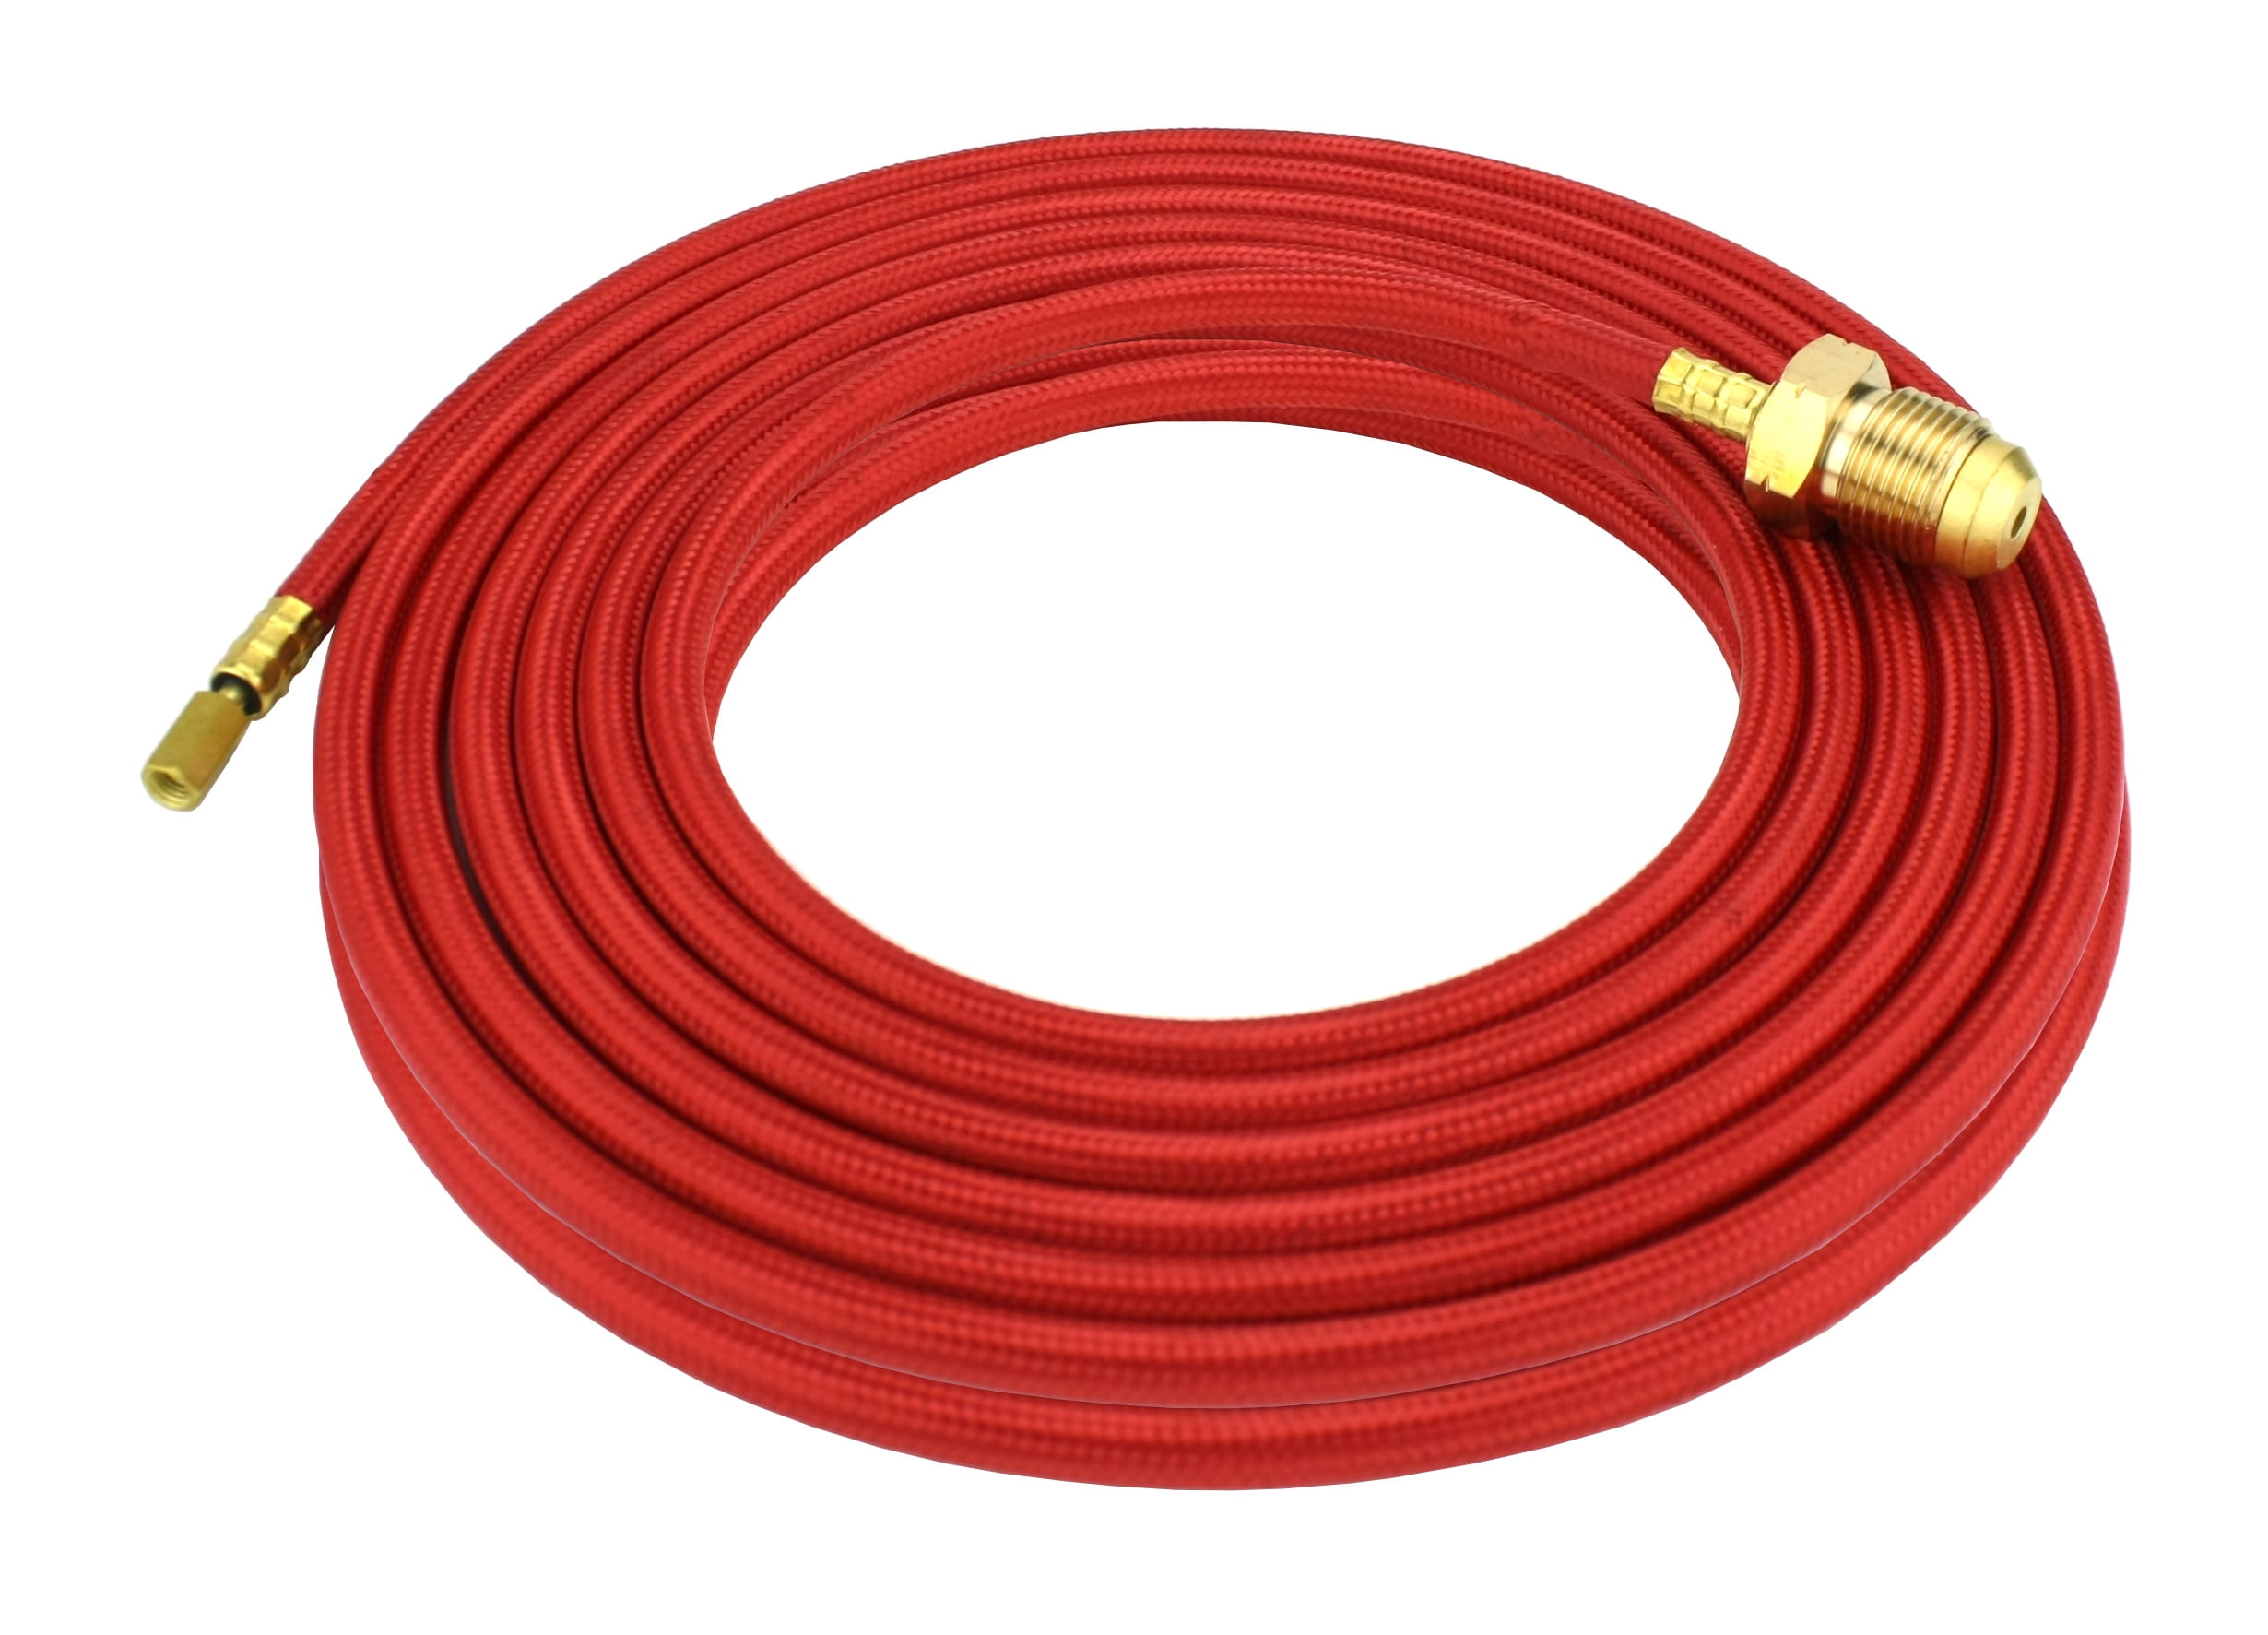 Series 20 and 18 25 Feet Water Hose Extension for Water-Cooled TIG Torches 